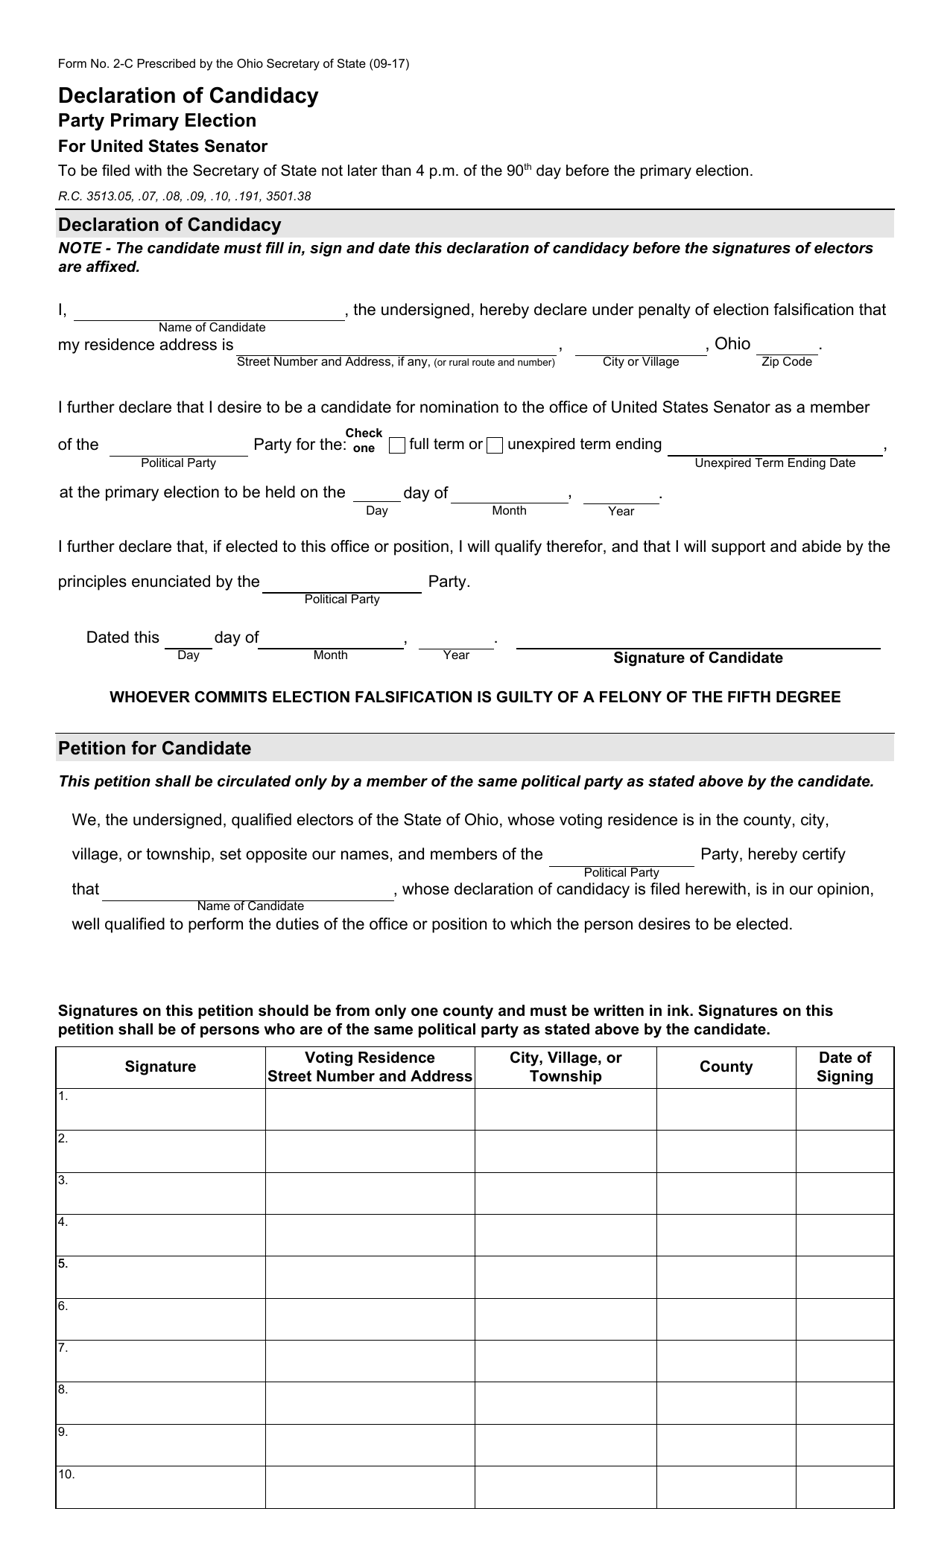 Form 2-C Declaration of Candidacy - Party Primary Election for United States Senator - Ohio, Page 1